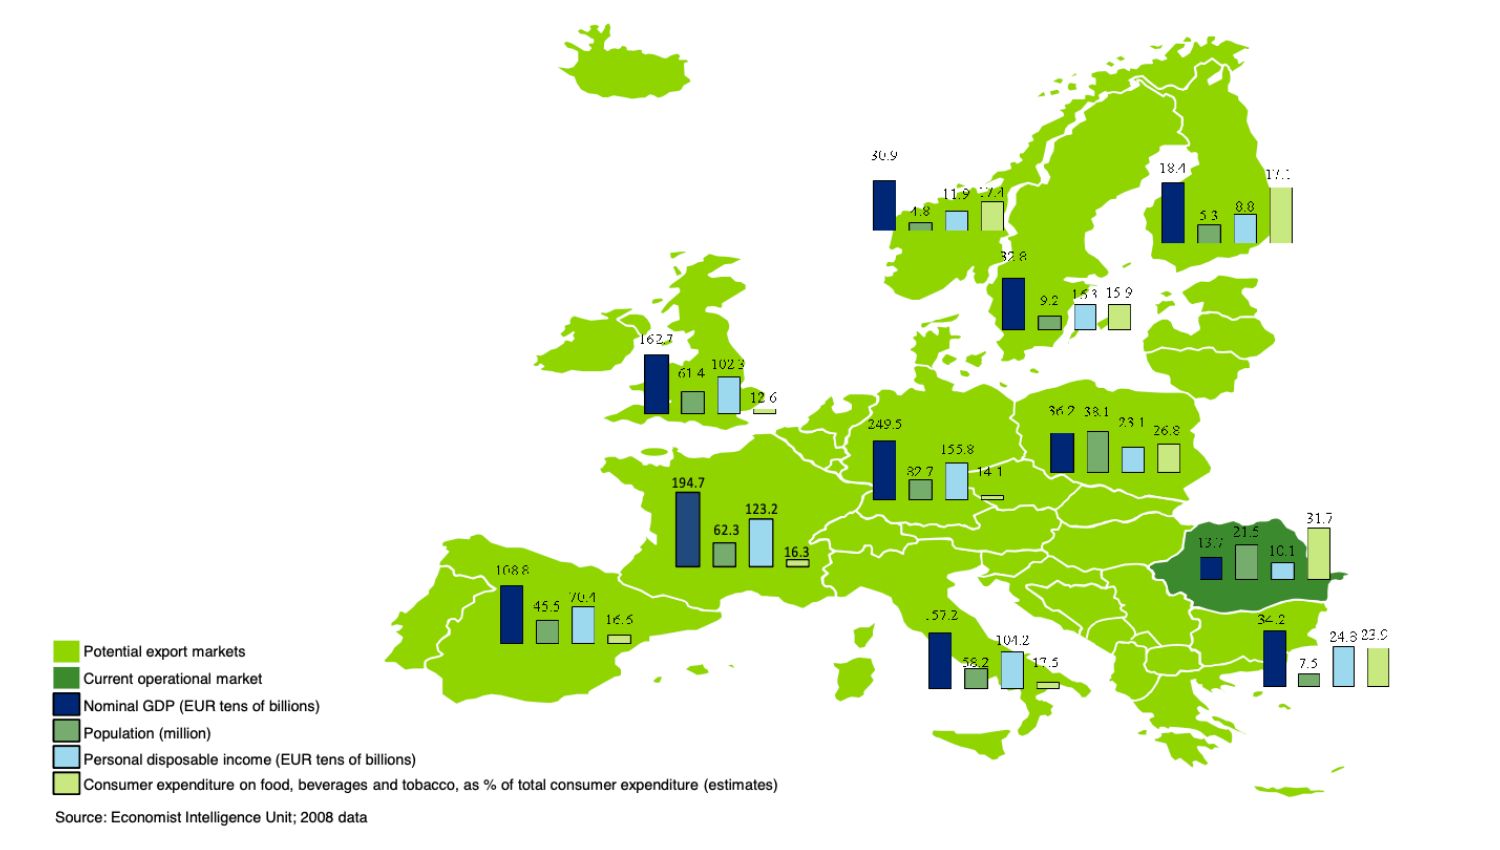 Potential target markets in Europe